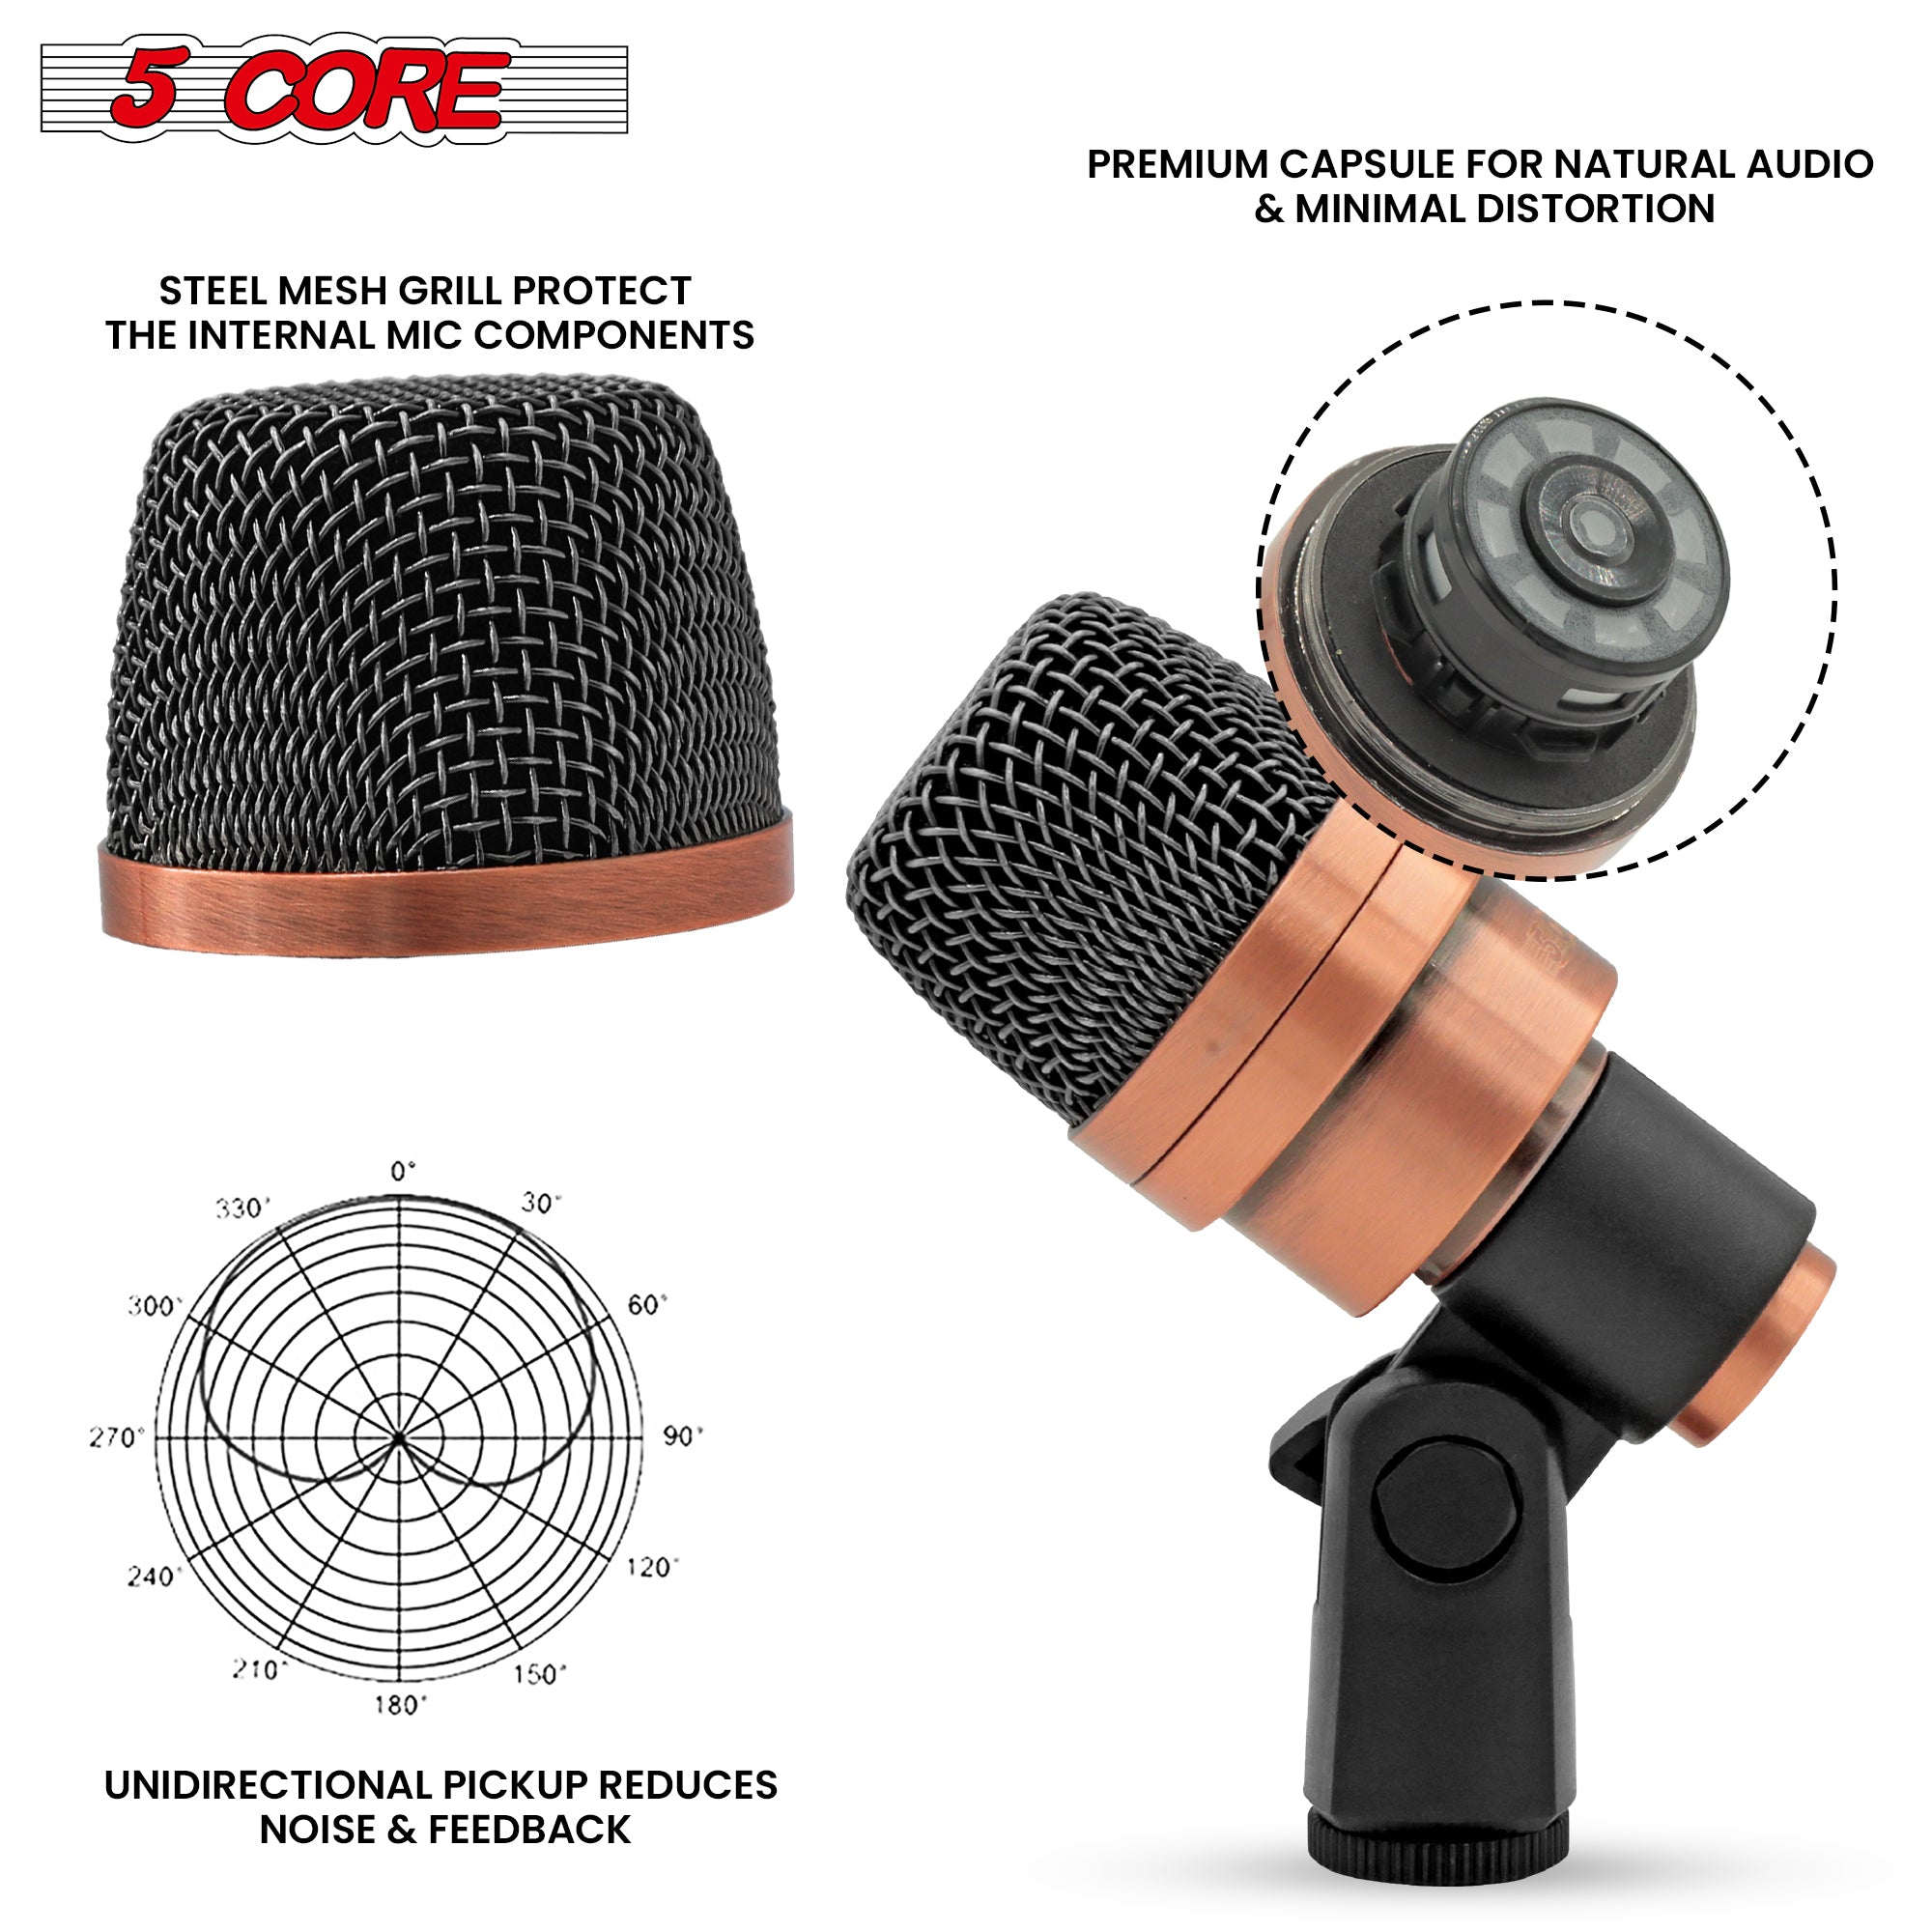 5 Core Snare Microphone • XLR Wired Uni Directional Tom Drum and Other Musical Instrument Mic